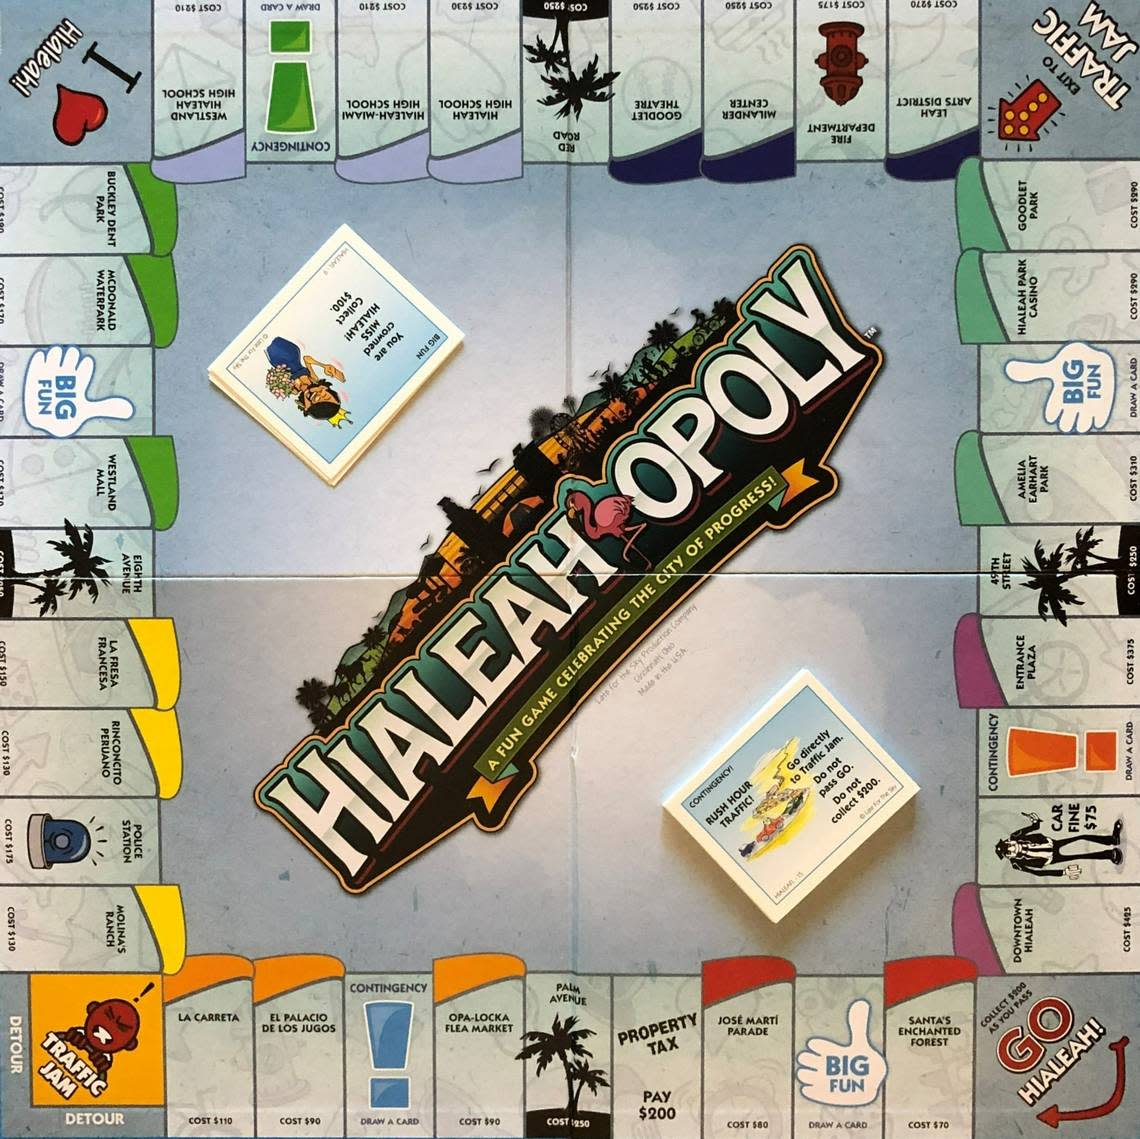 “Hialeahopoly” is only available at the Walmart in Hialeah Gardens.